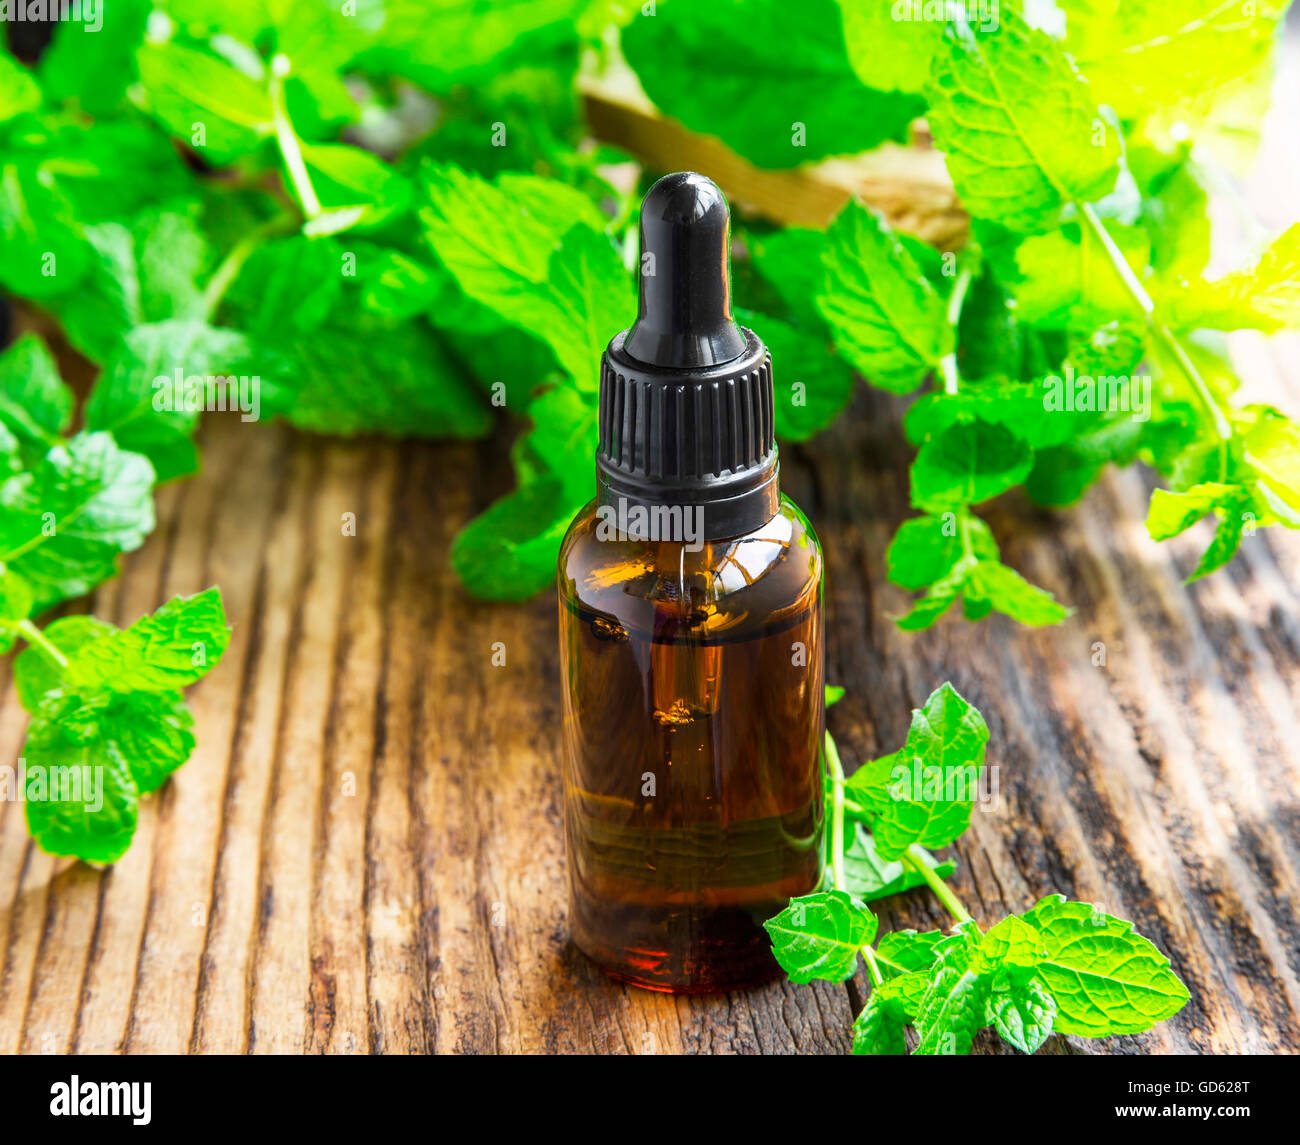 Mint essence/oil in black bottle on wooden board with mint leaves plant Stock Photo